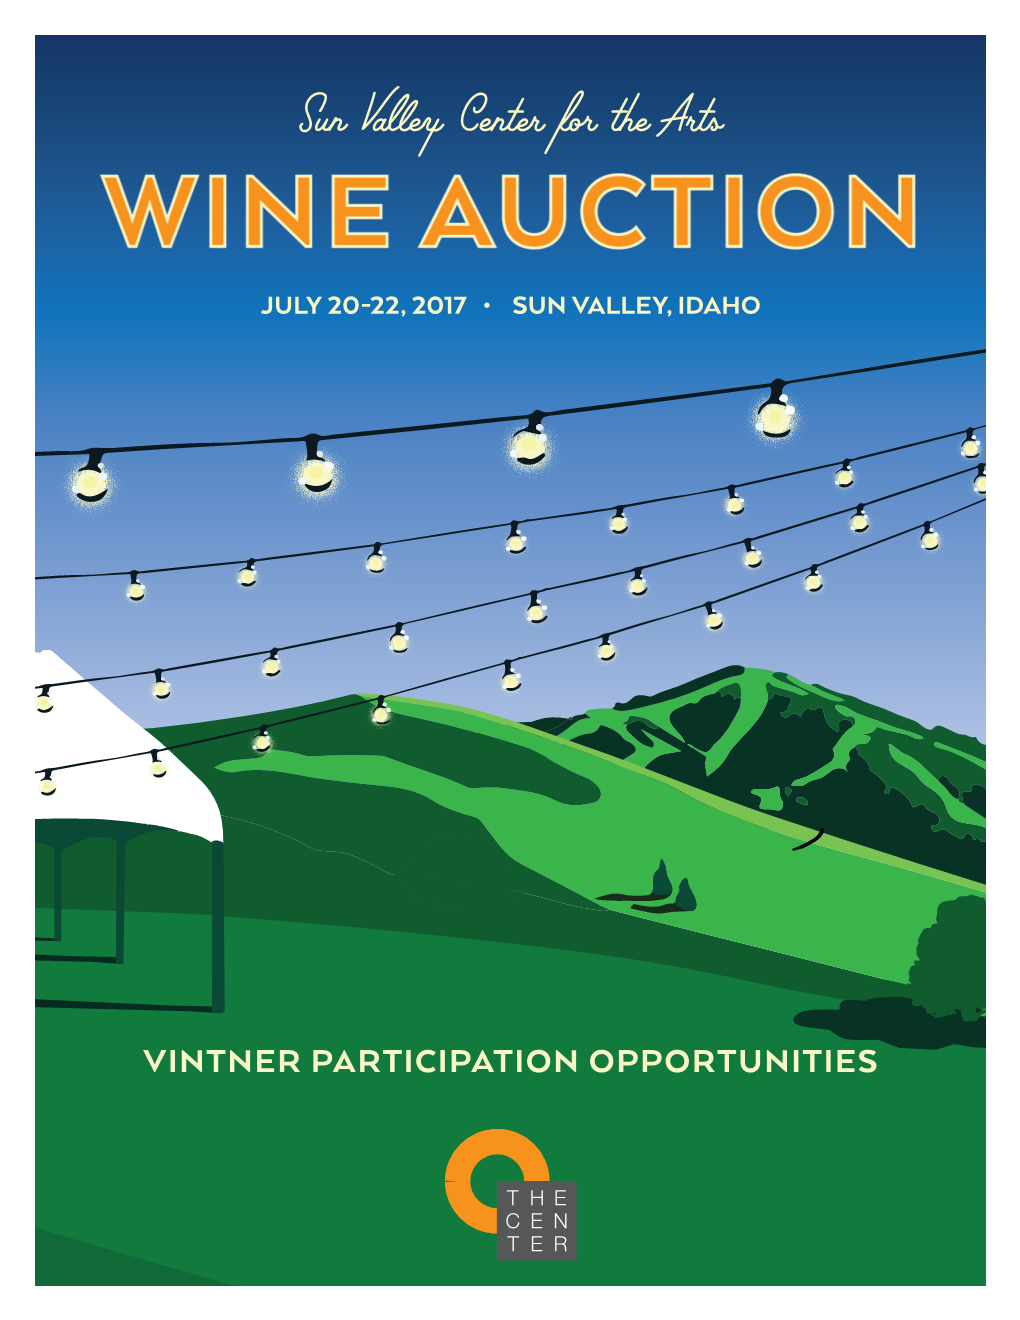 Sun Valley Center for the Arts Wine Auction Gala a Celebration of Wine, a Benefit for Arts and Education